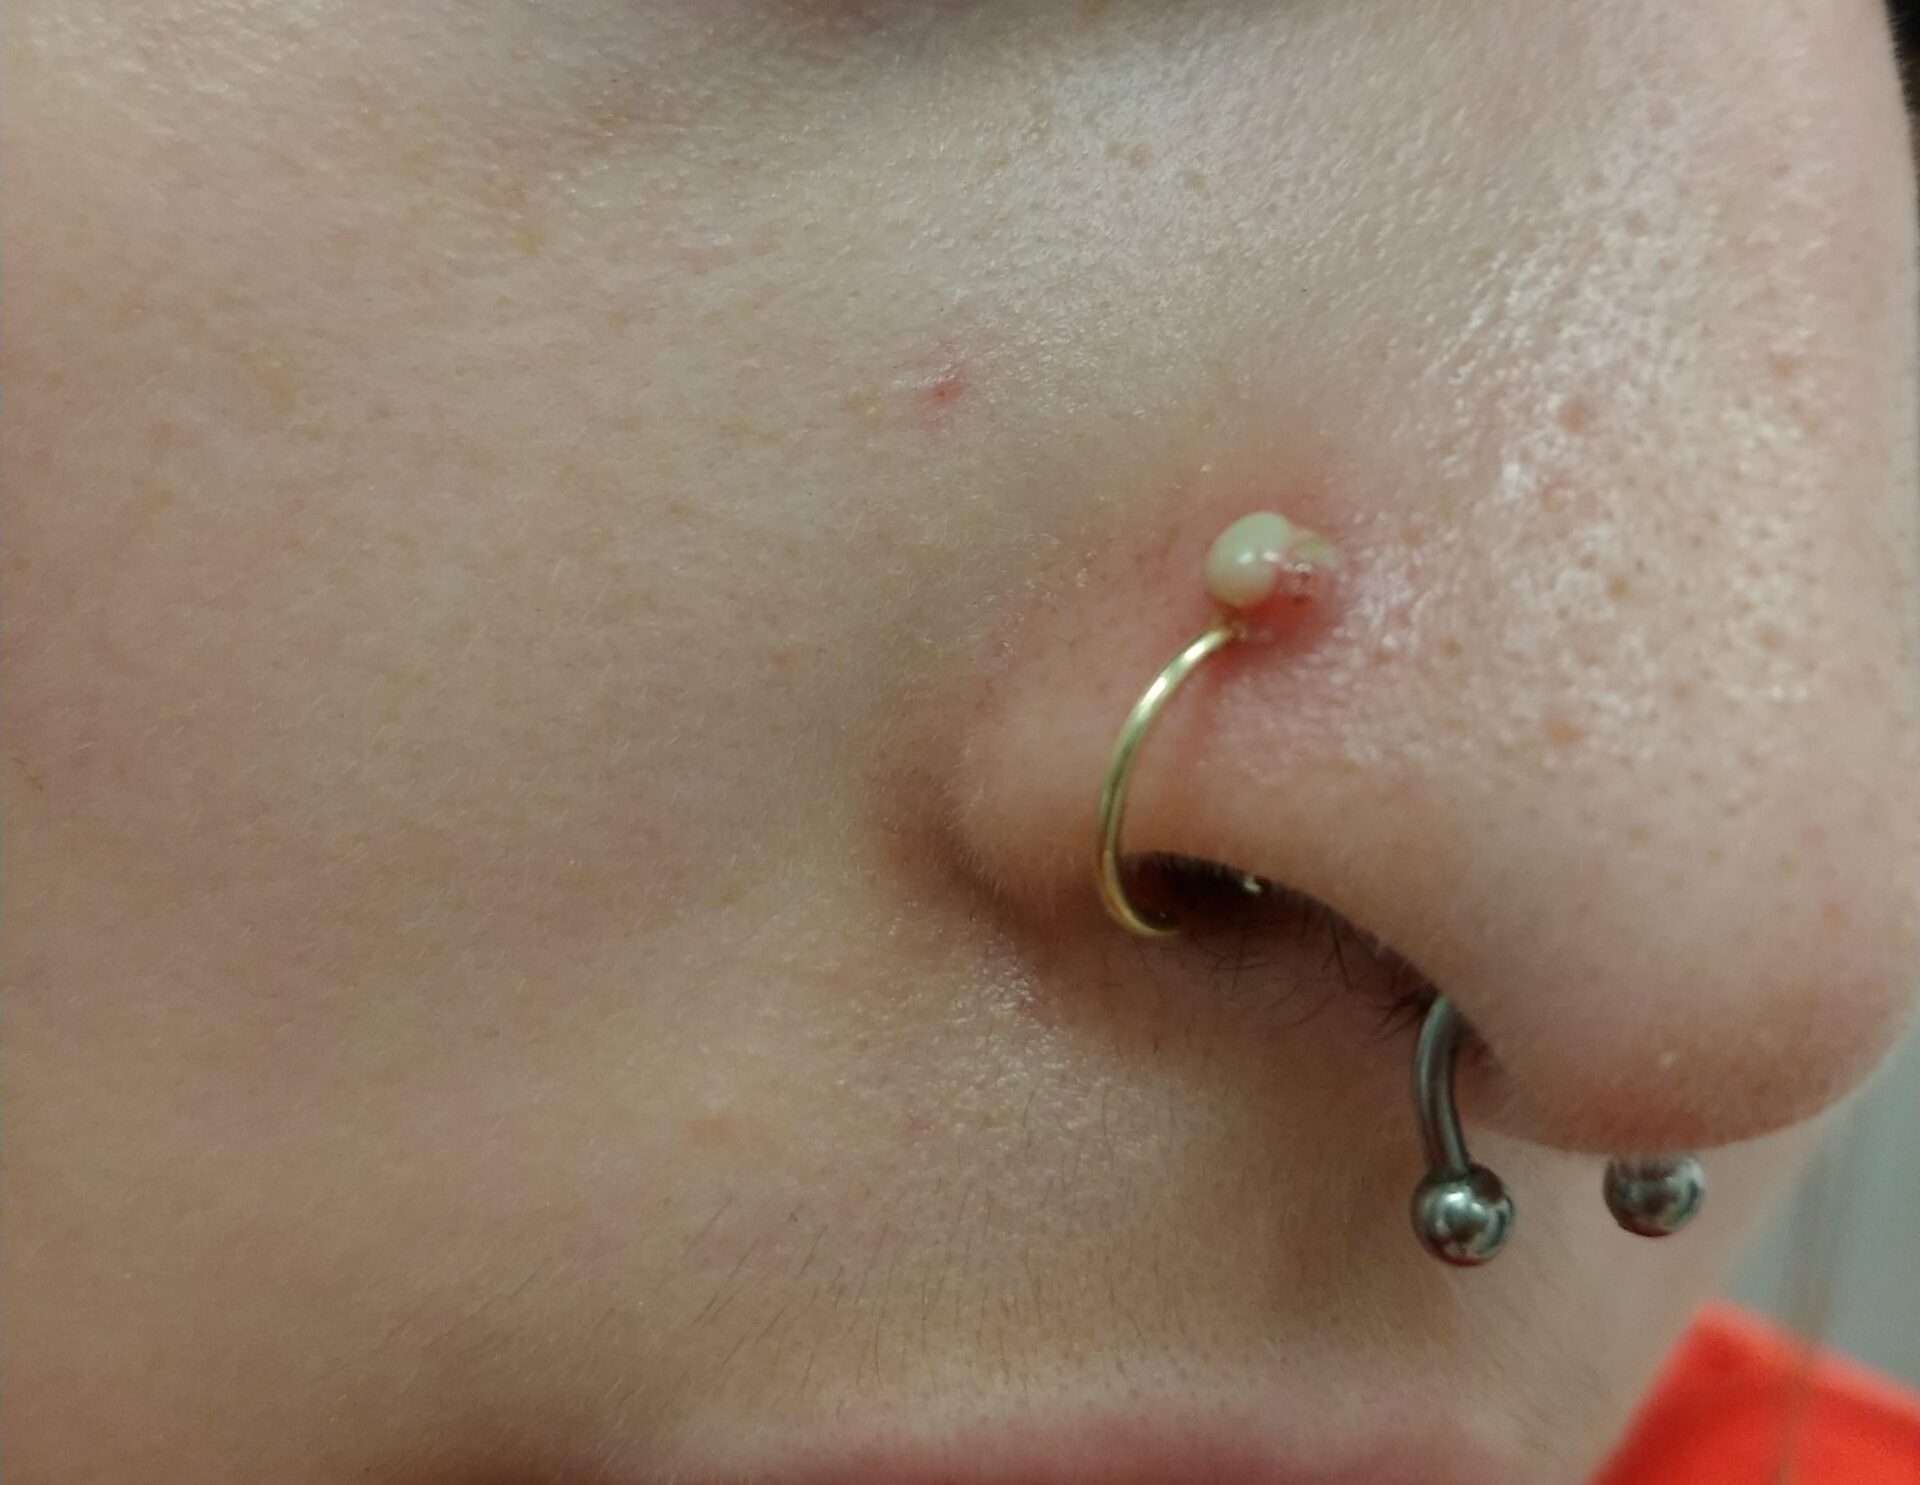 Infected Nose Piercing Pictures, Symptoms, Treatment, Bump, Home Is It Normal For Nose Piercing To Sink In